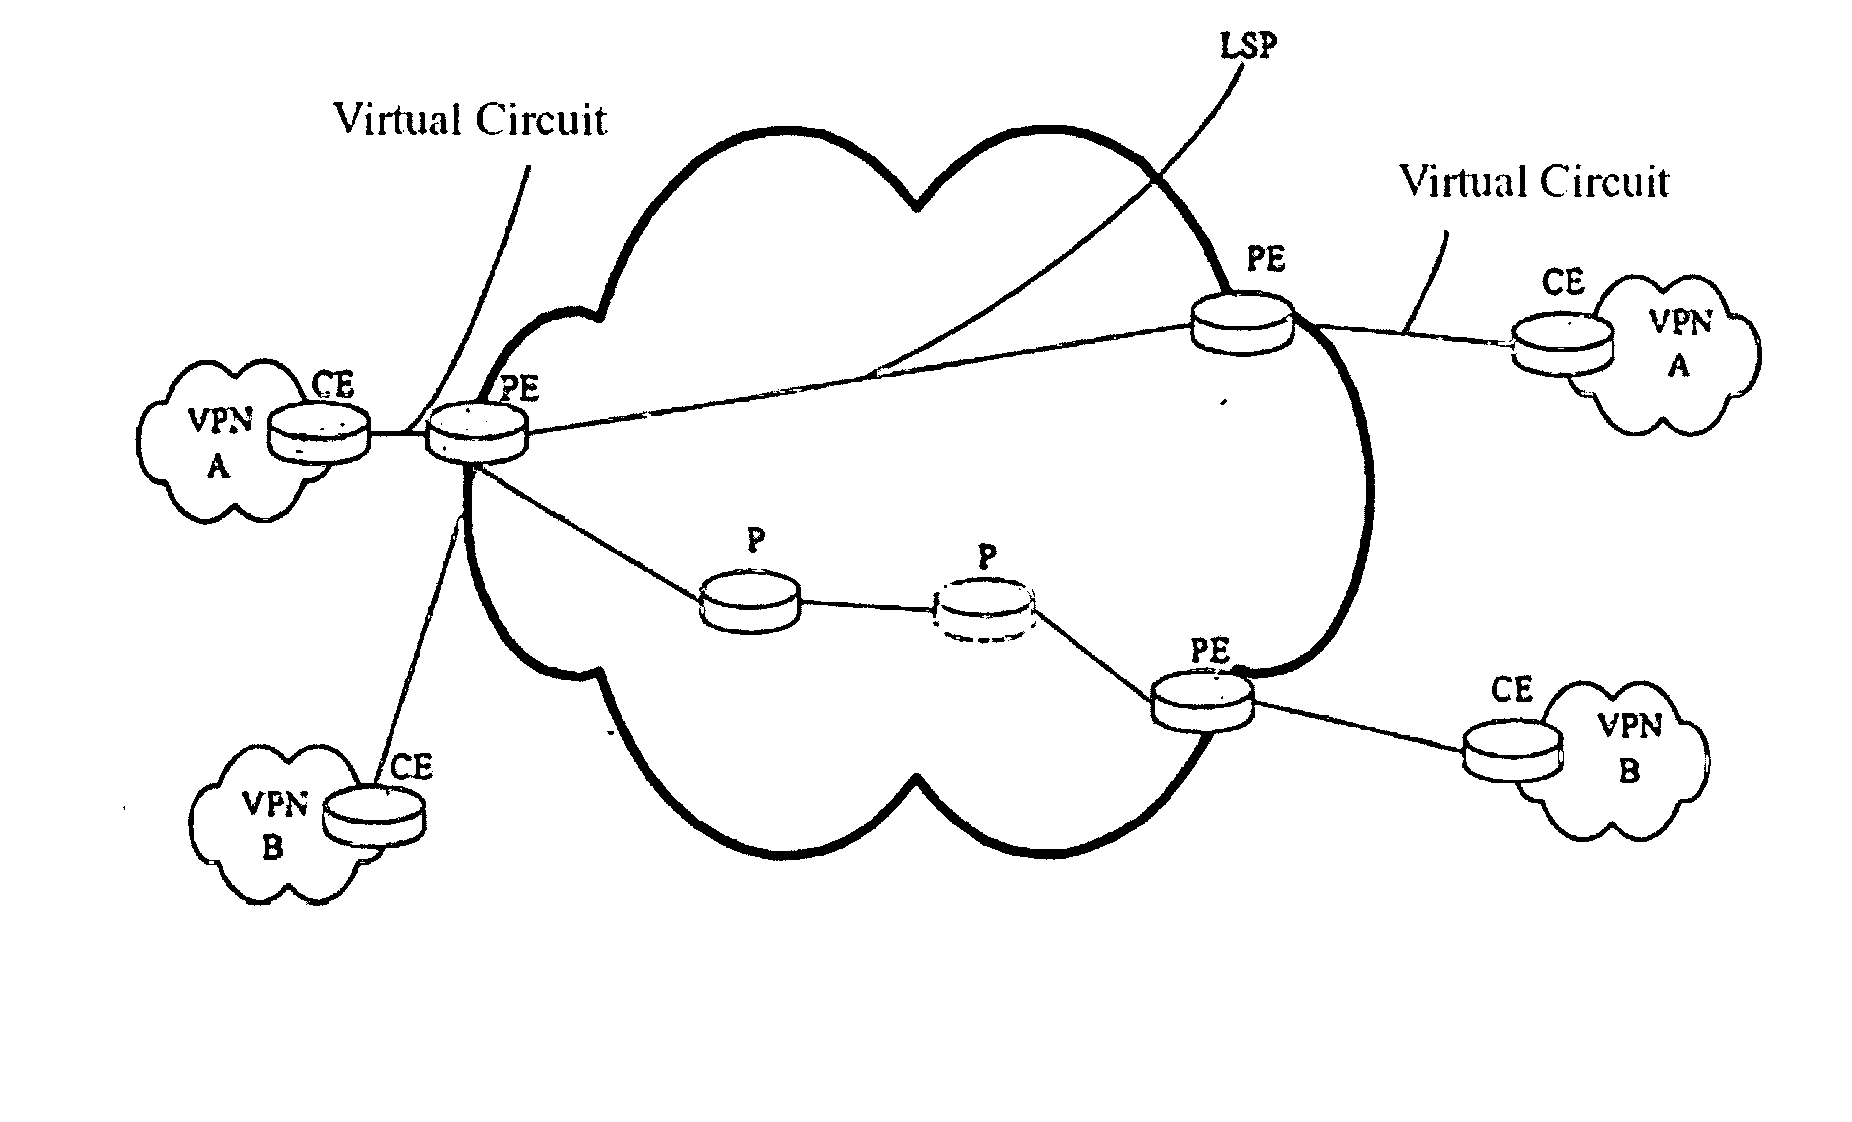 Method for implementing the virtual leased line